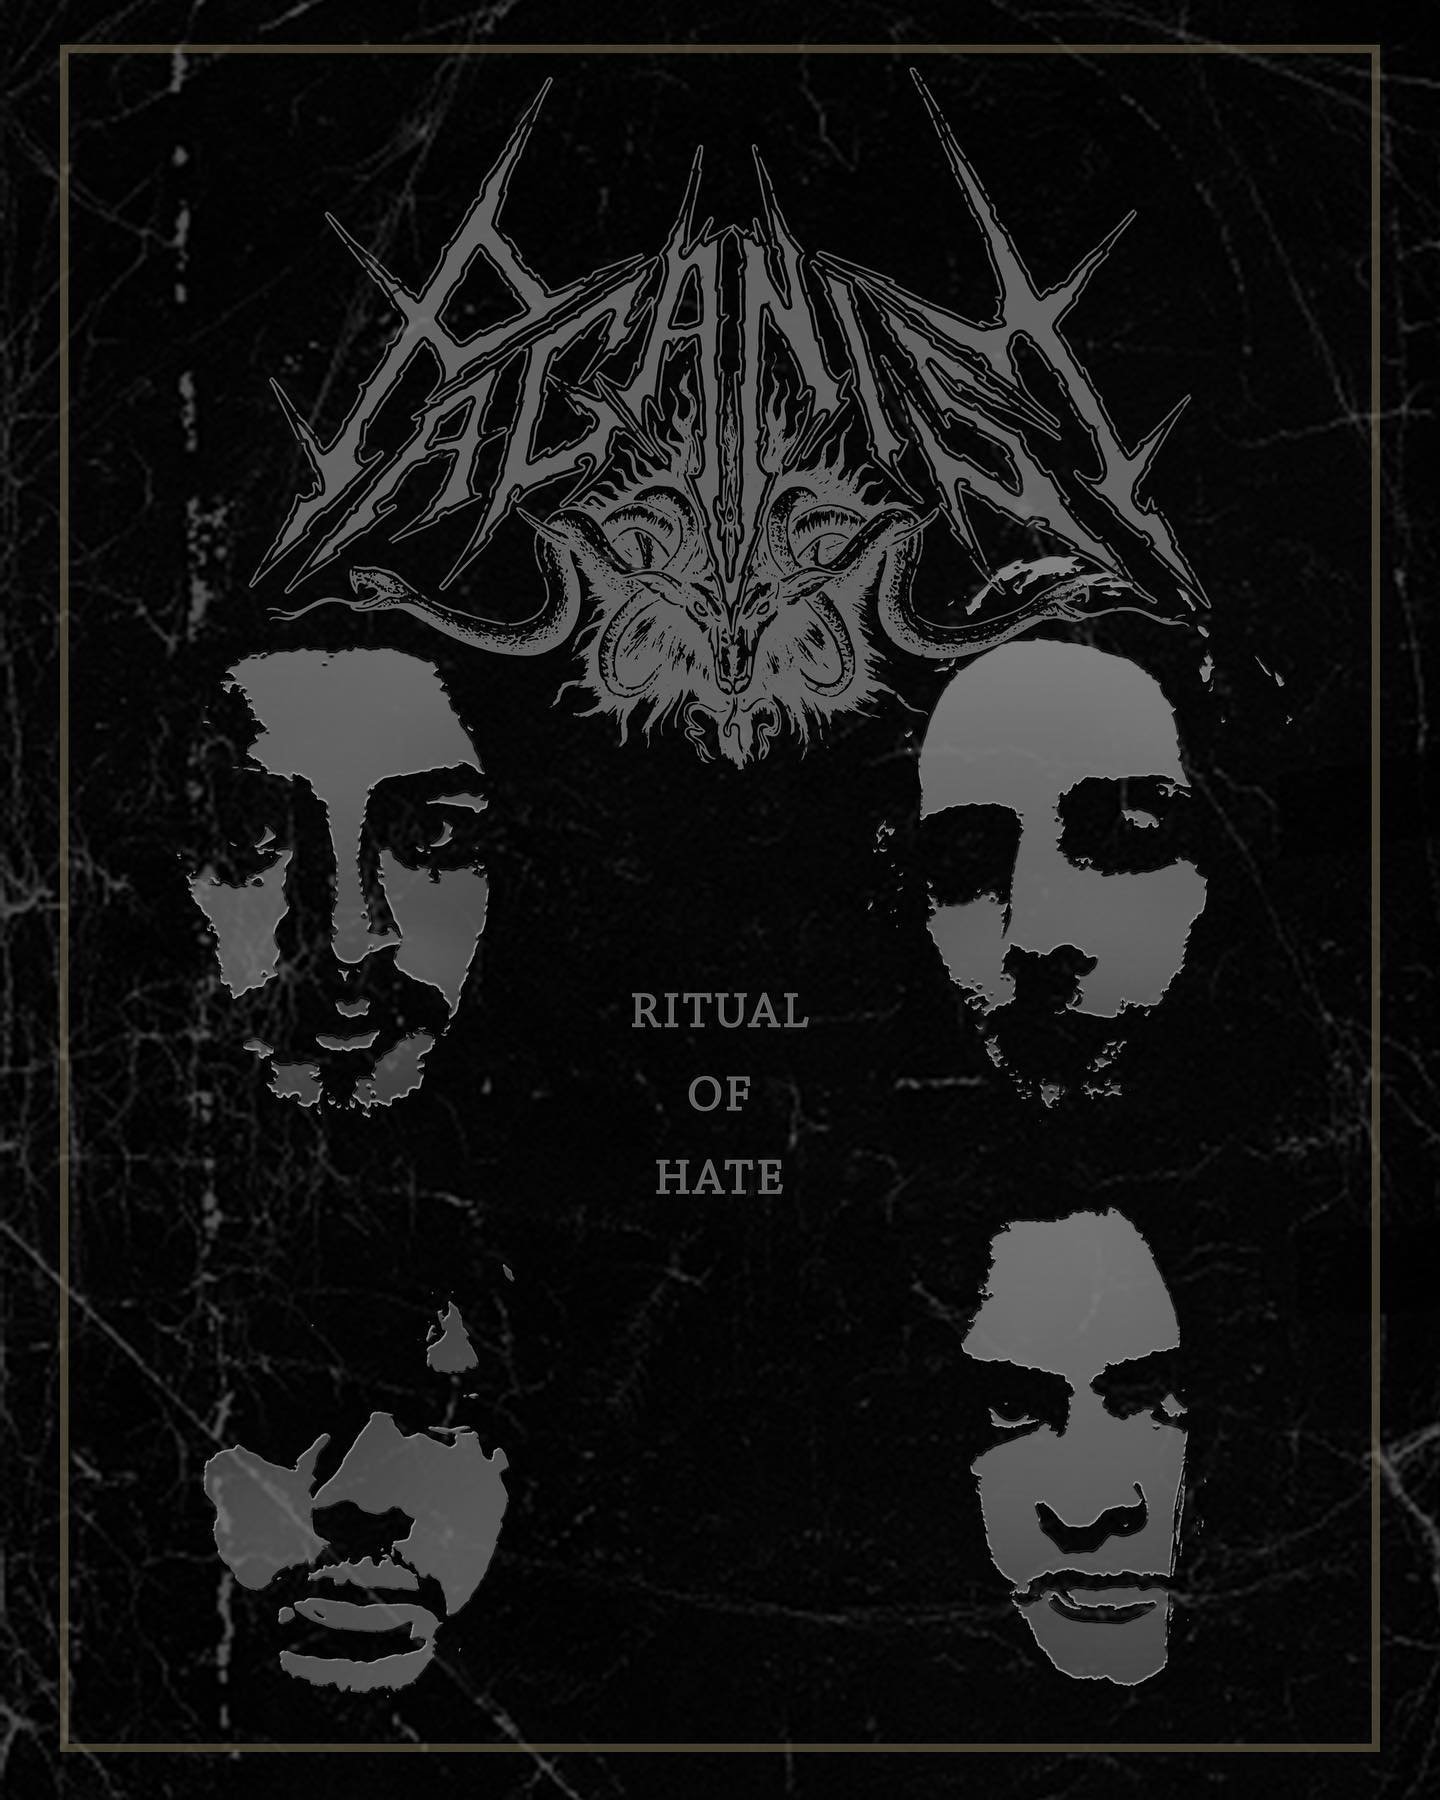 Interview with PAGANIST